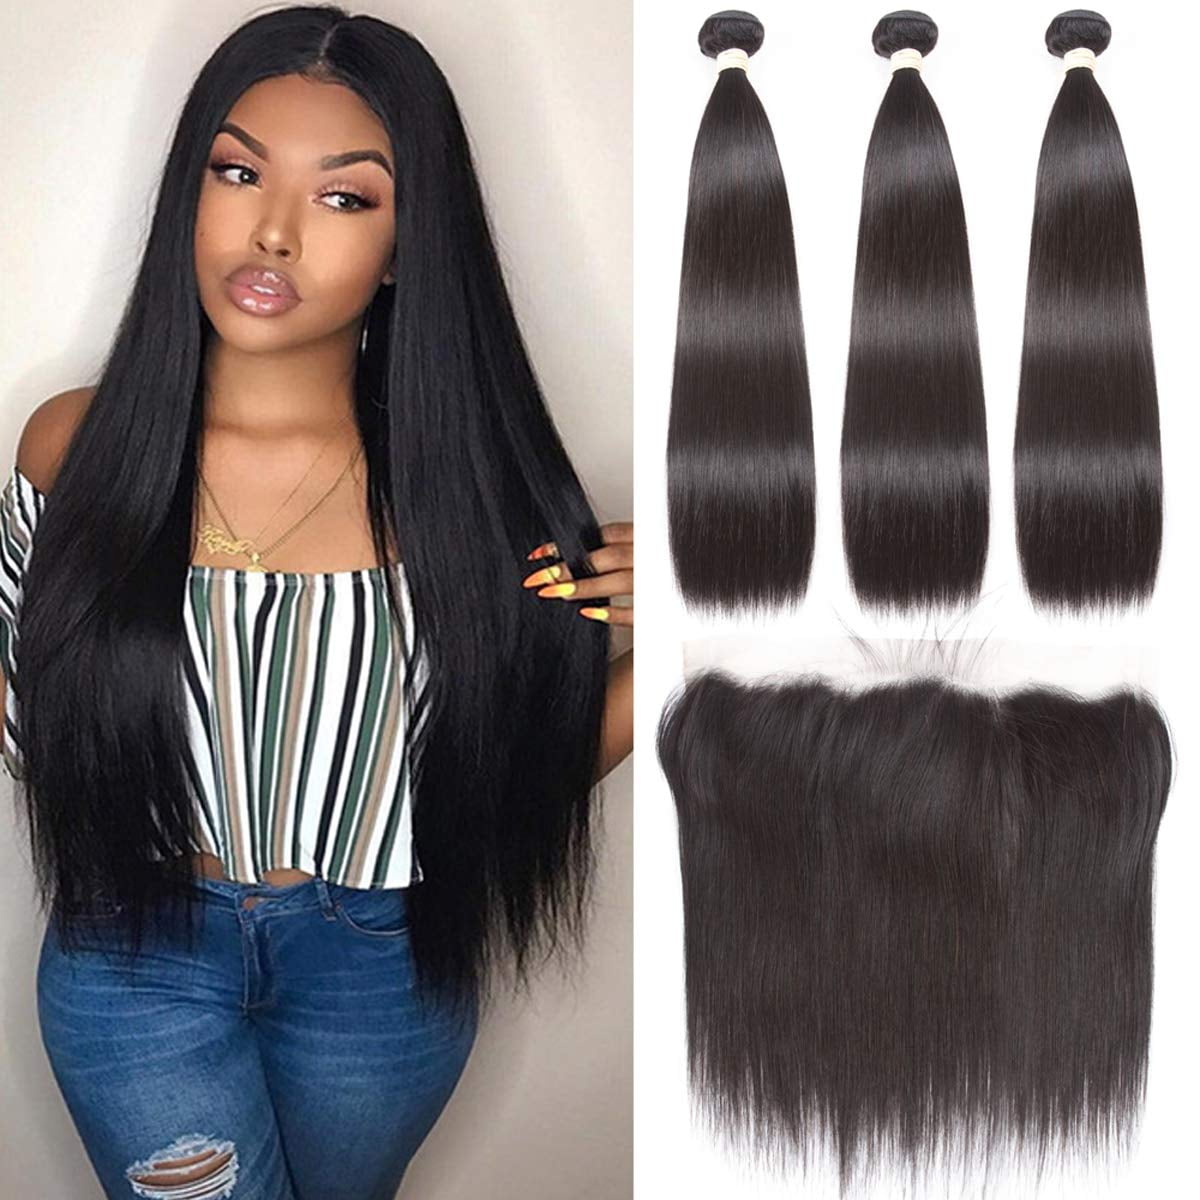 Brazilian Straight Hair 4 Bundles With Frontal Closure(20 22 24 26+18Frontal)  13x4 Ear to Ear Lace Frontal 8A Unprocessed Virgin Human Hair Bundles With  Frontal Natural Color 